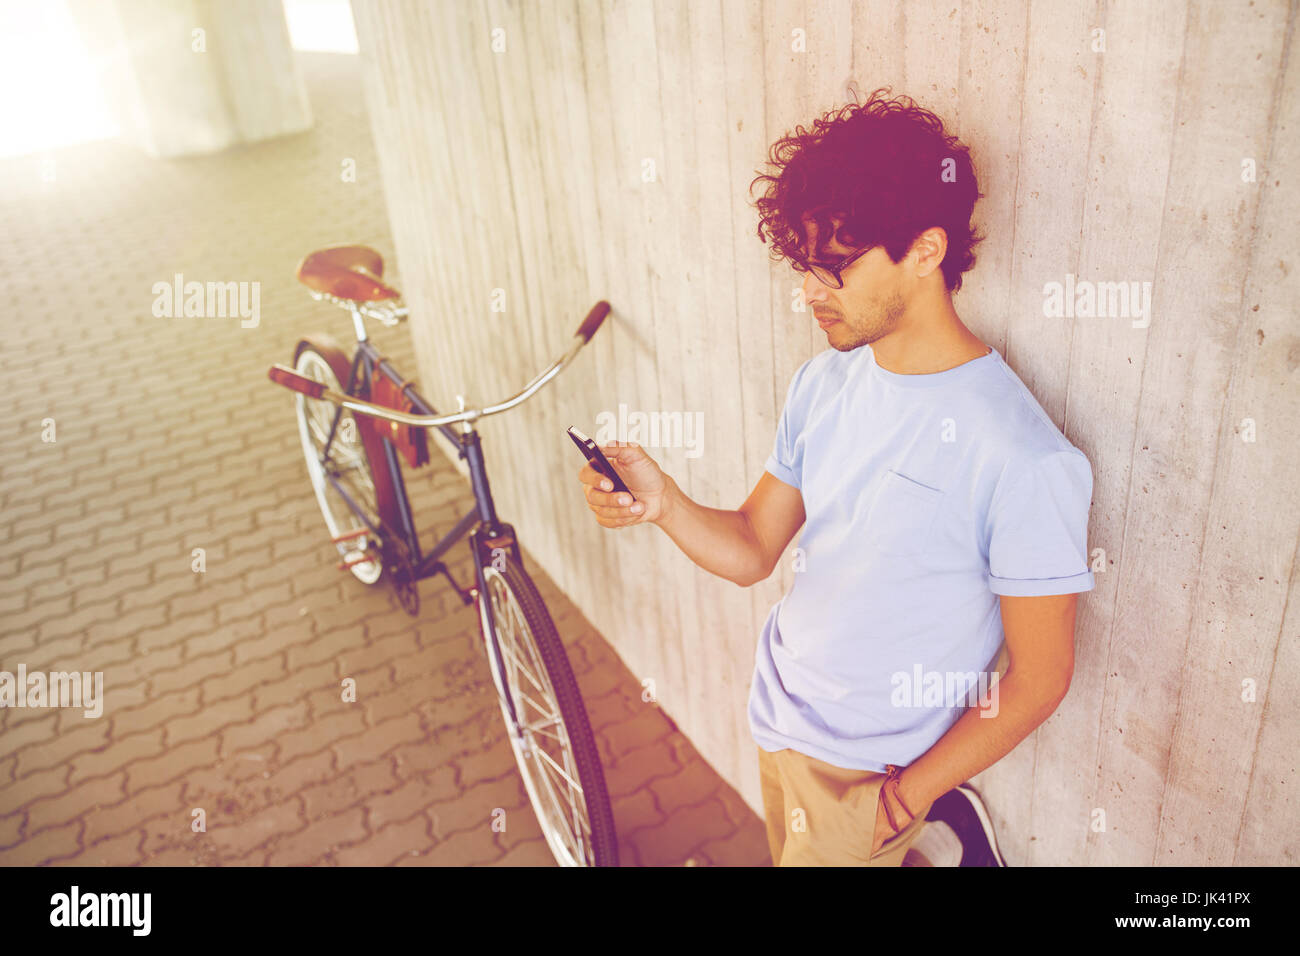 man with smartphone and fixed gear bike on street Stock Photo